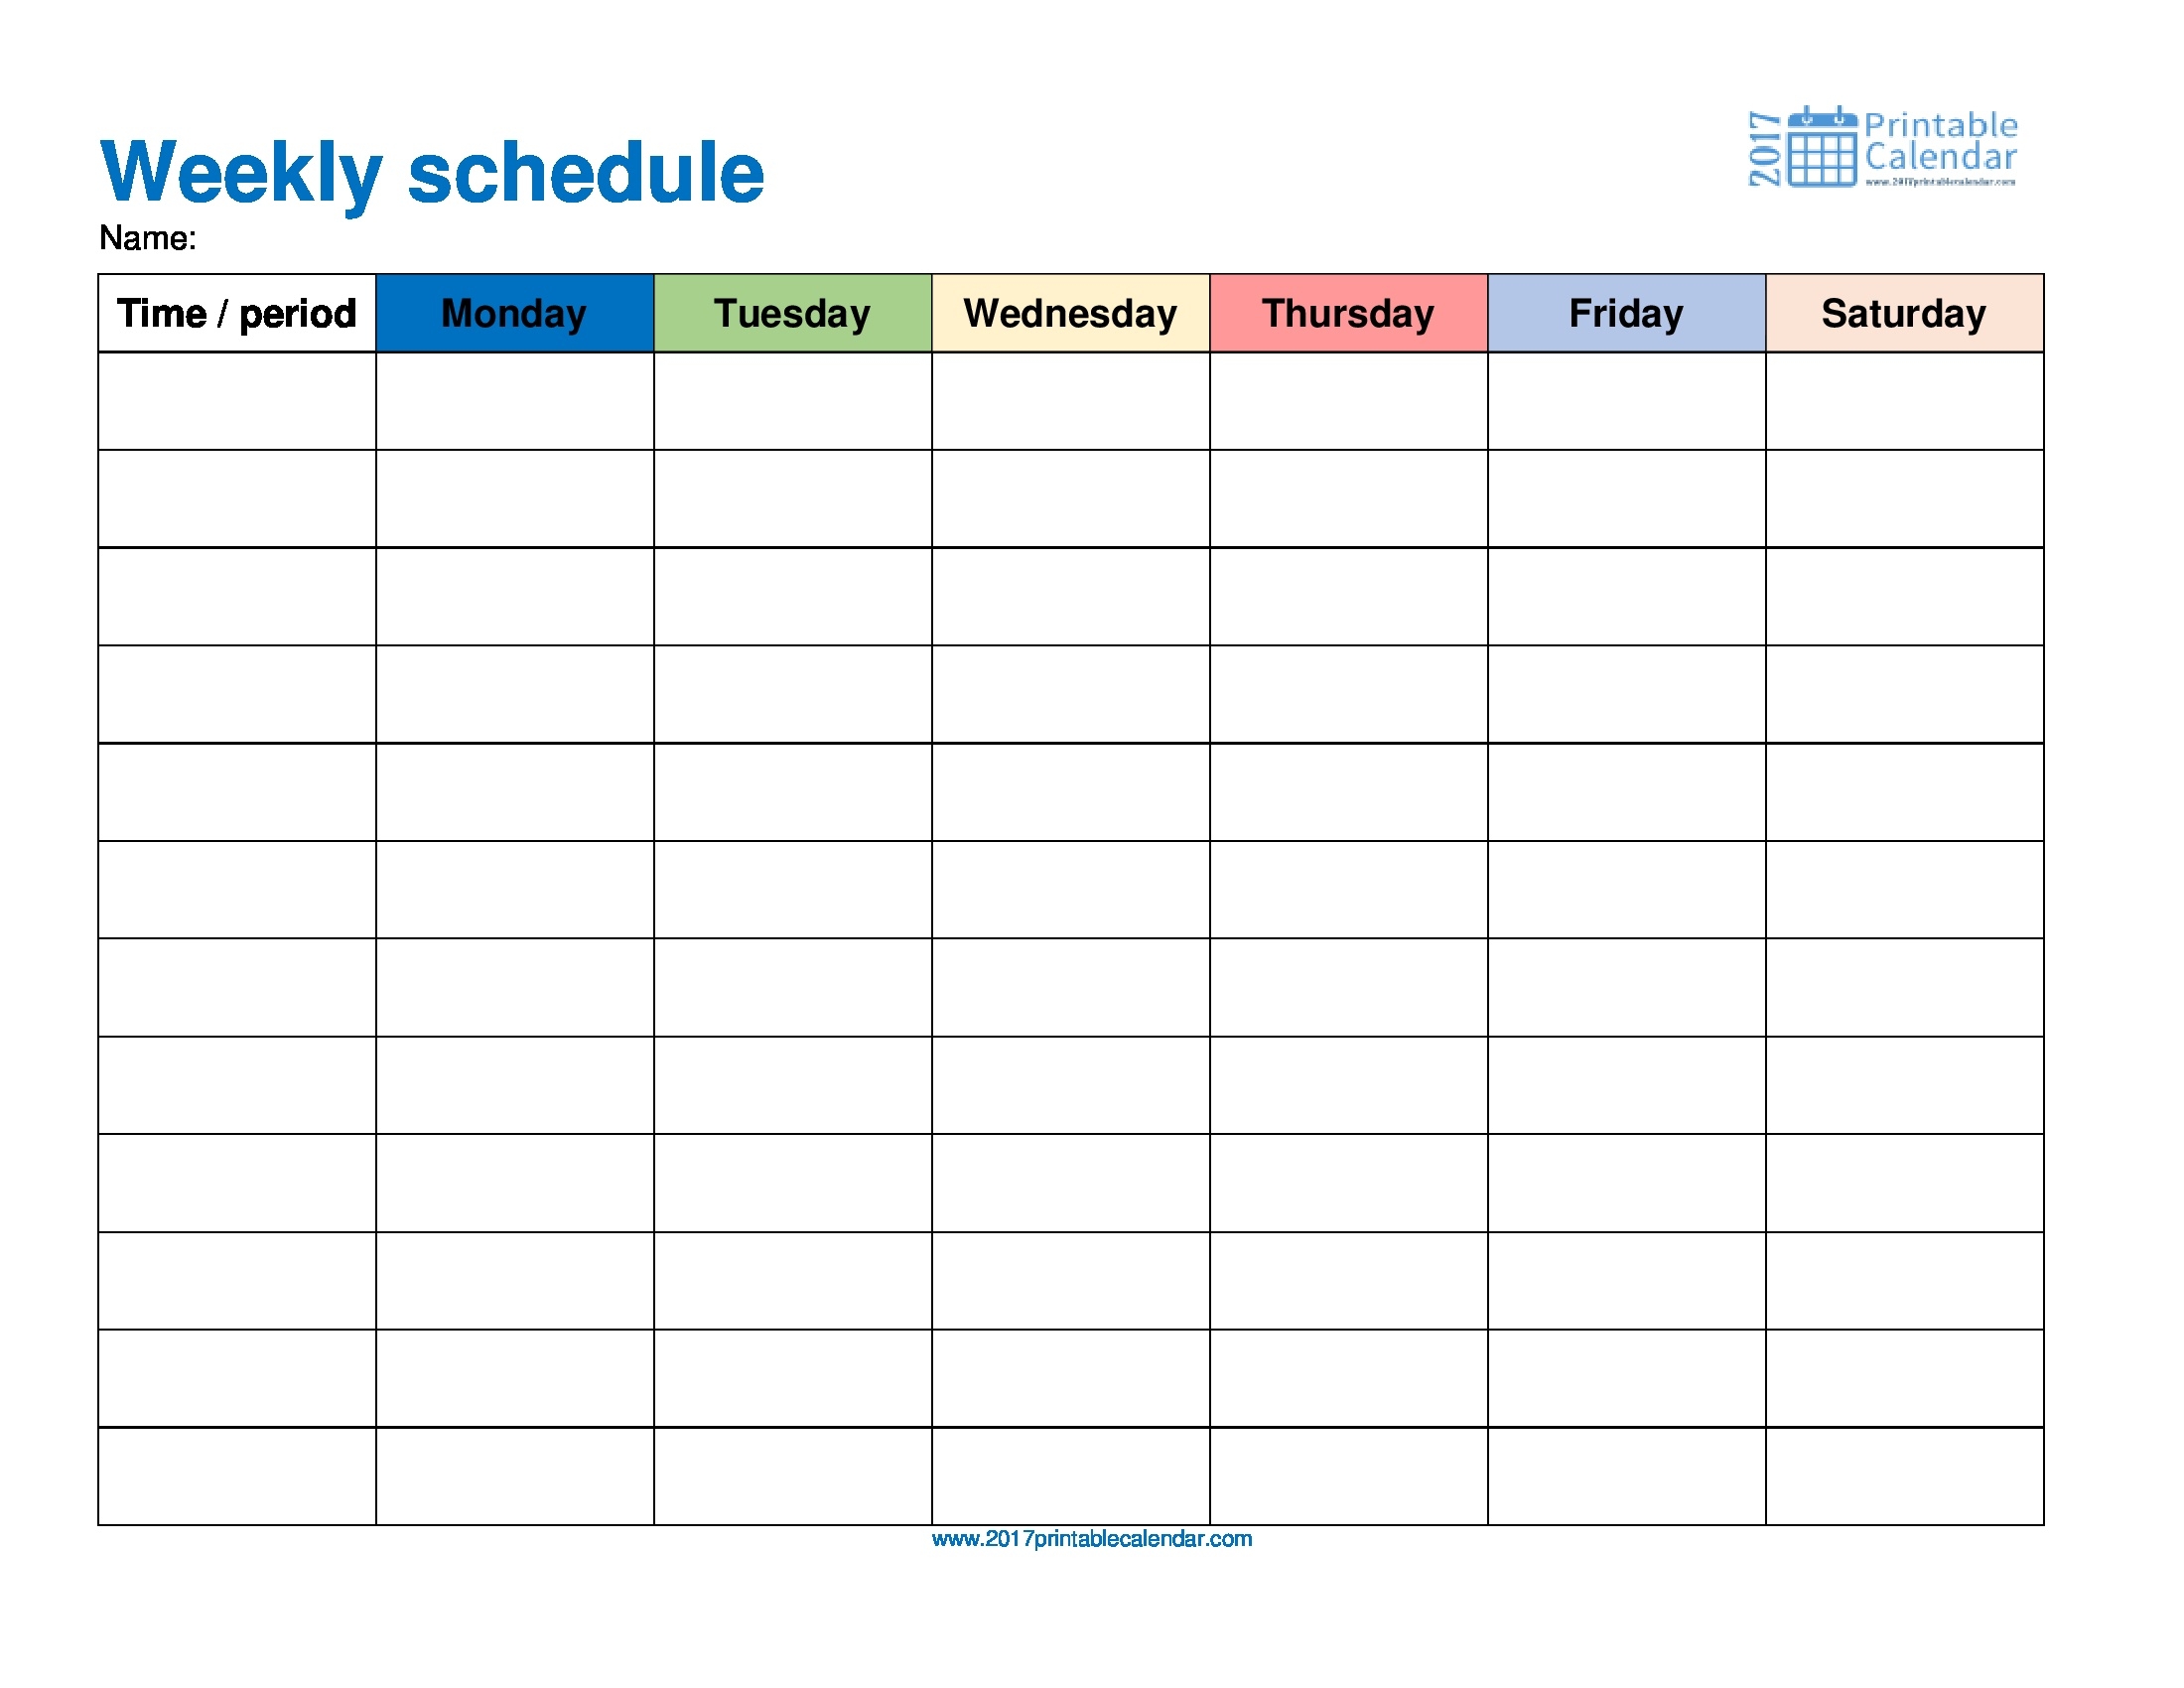 Template Schedule Weekly - 28 Images - Weekly Calendarhour  Printable Appointment Calendars Monday Through Friday